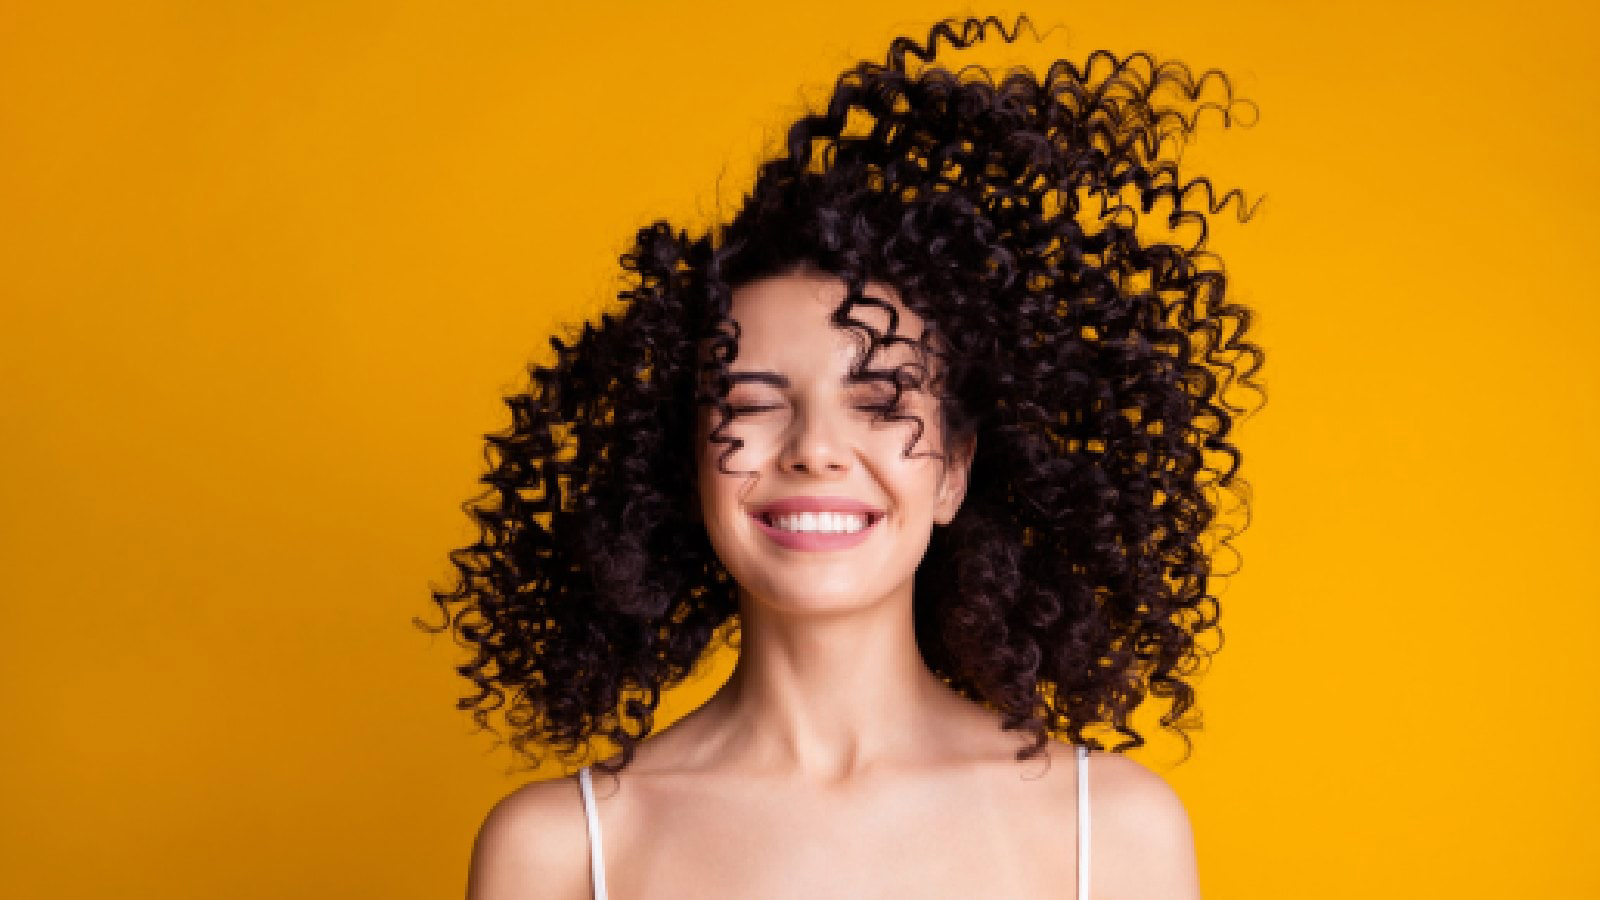 5 best shampoo for curly hair to tame the frizz